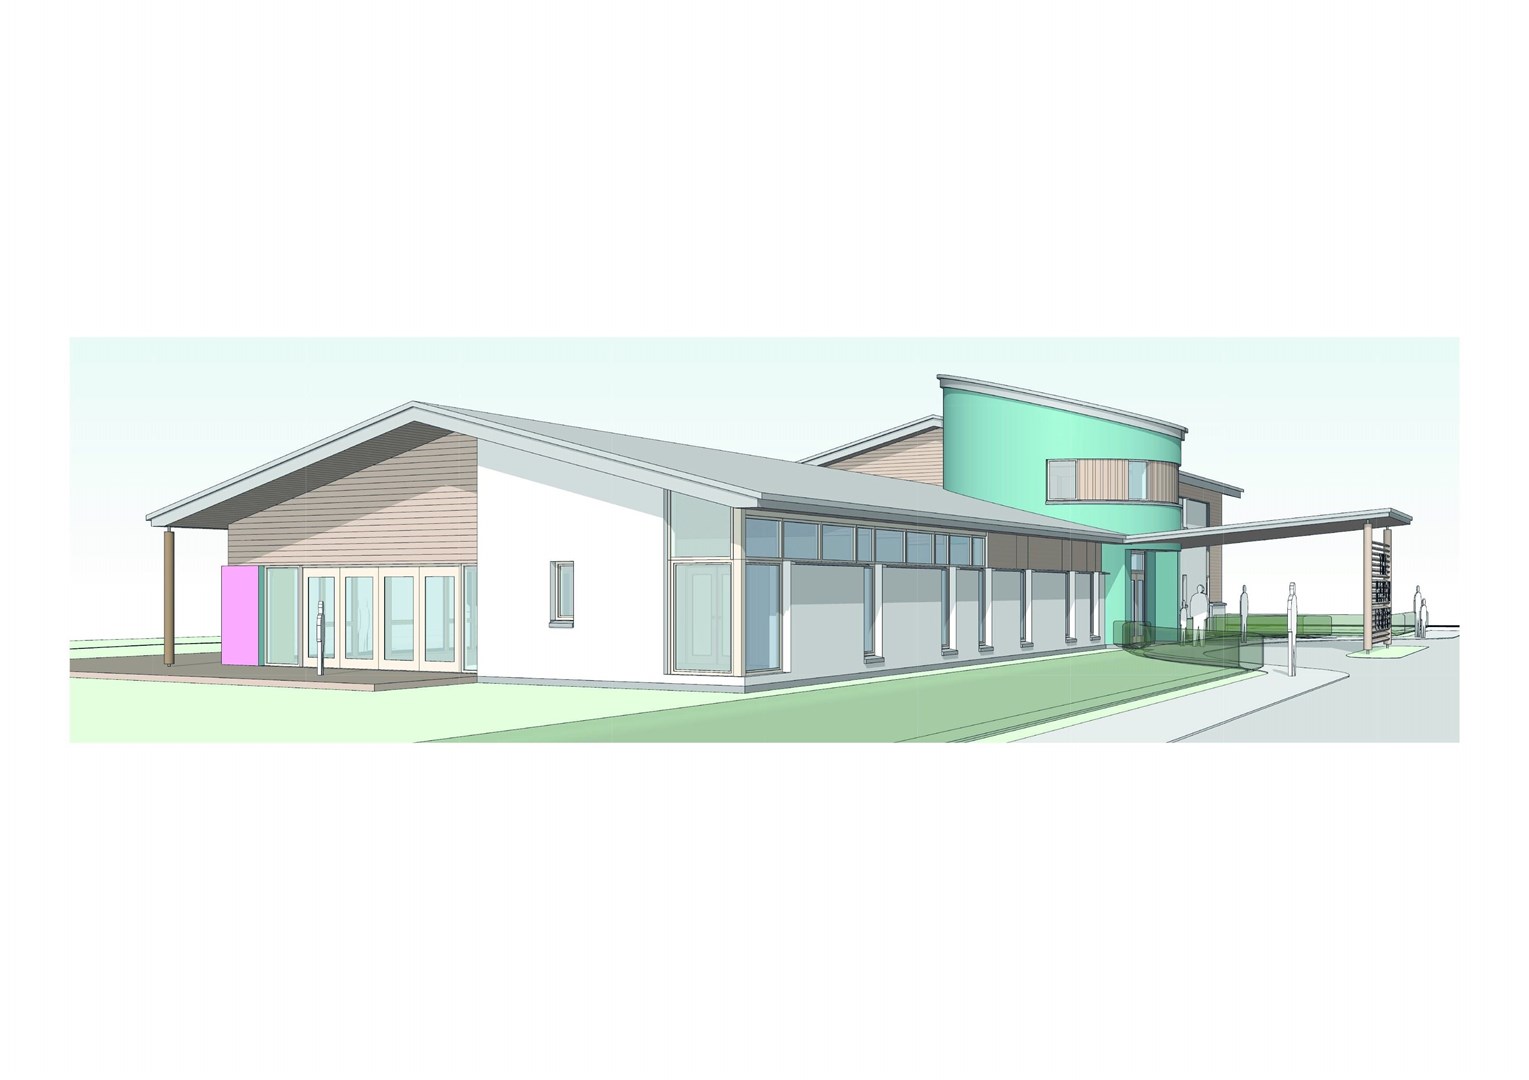 The Haven Centre is planned for a site at Smithton.